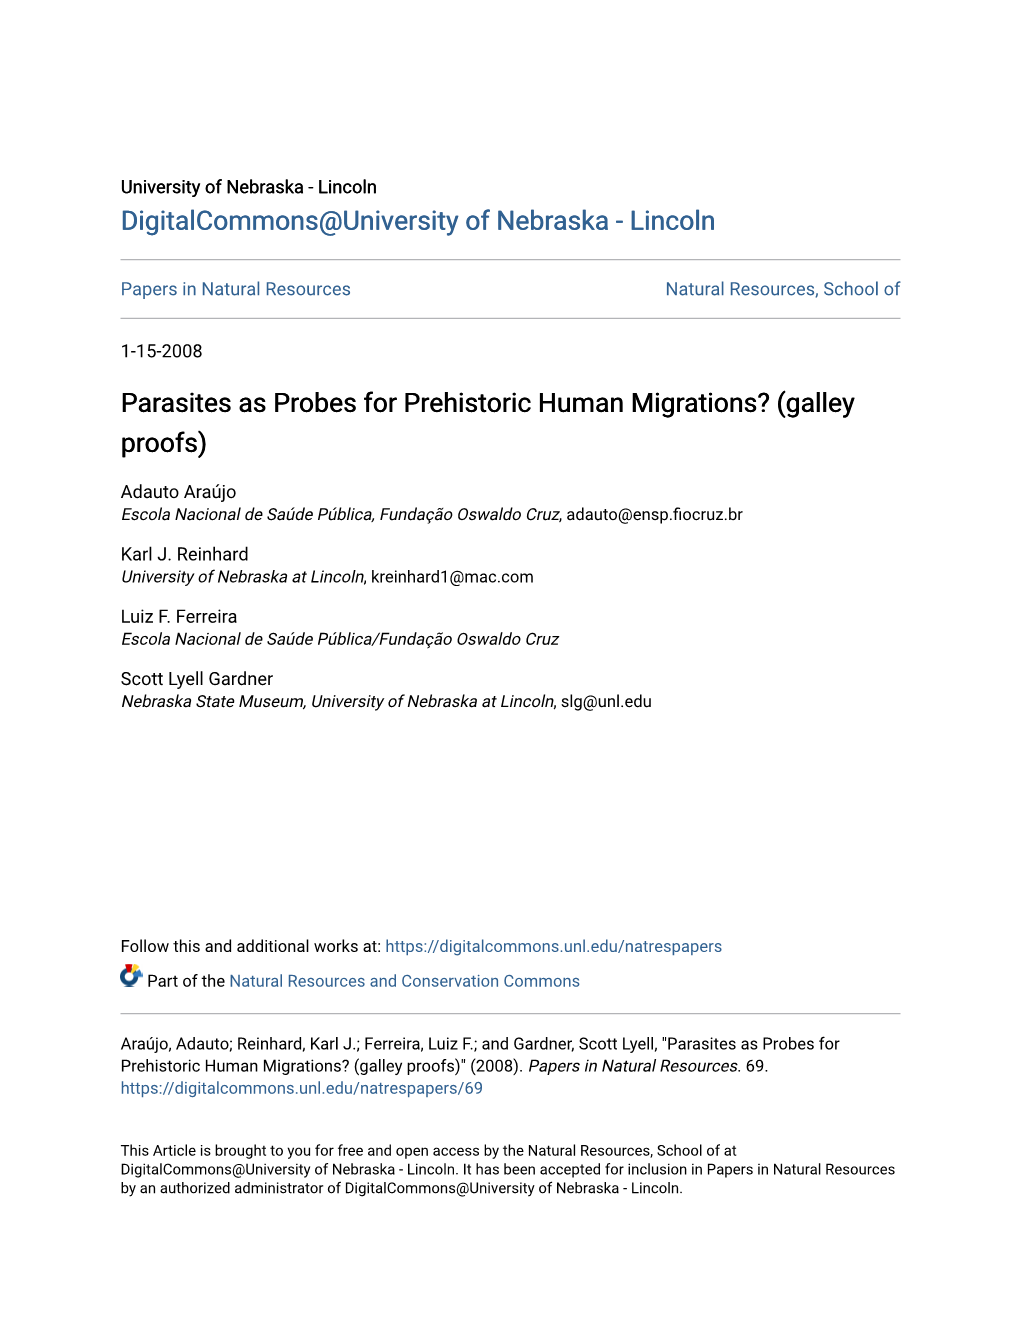 Parasites As Probes for Prehistoric Human Migrations? (Galley Proofs)